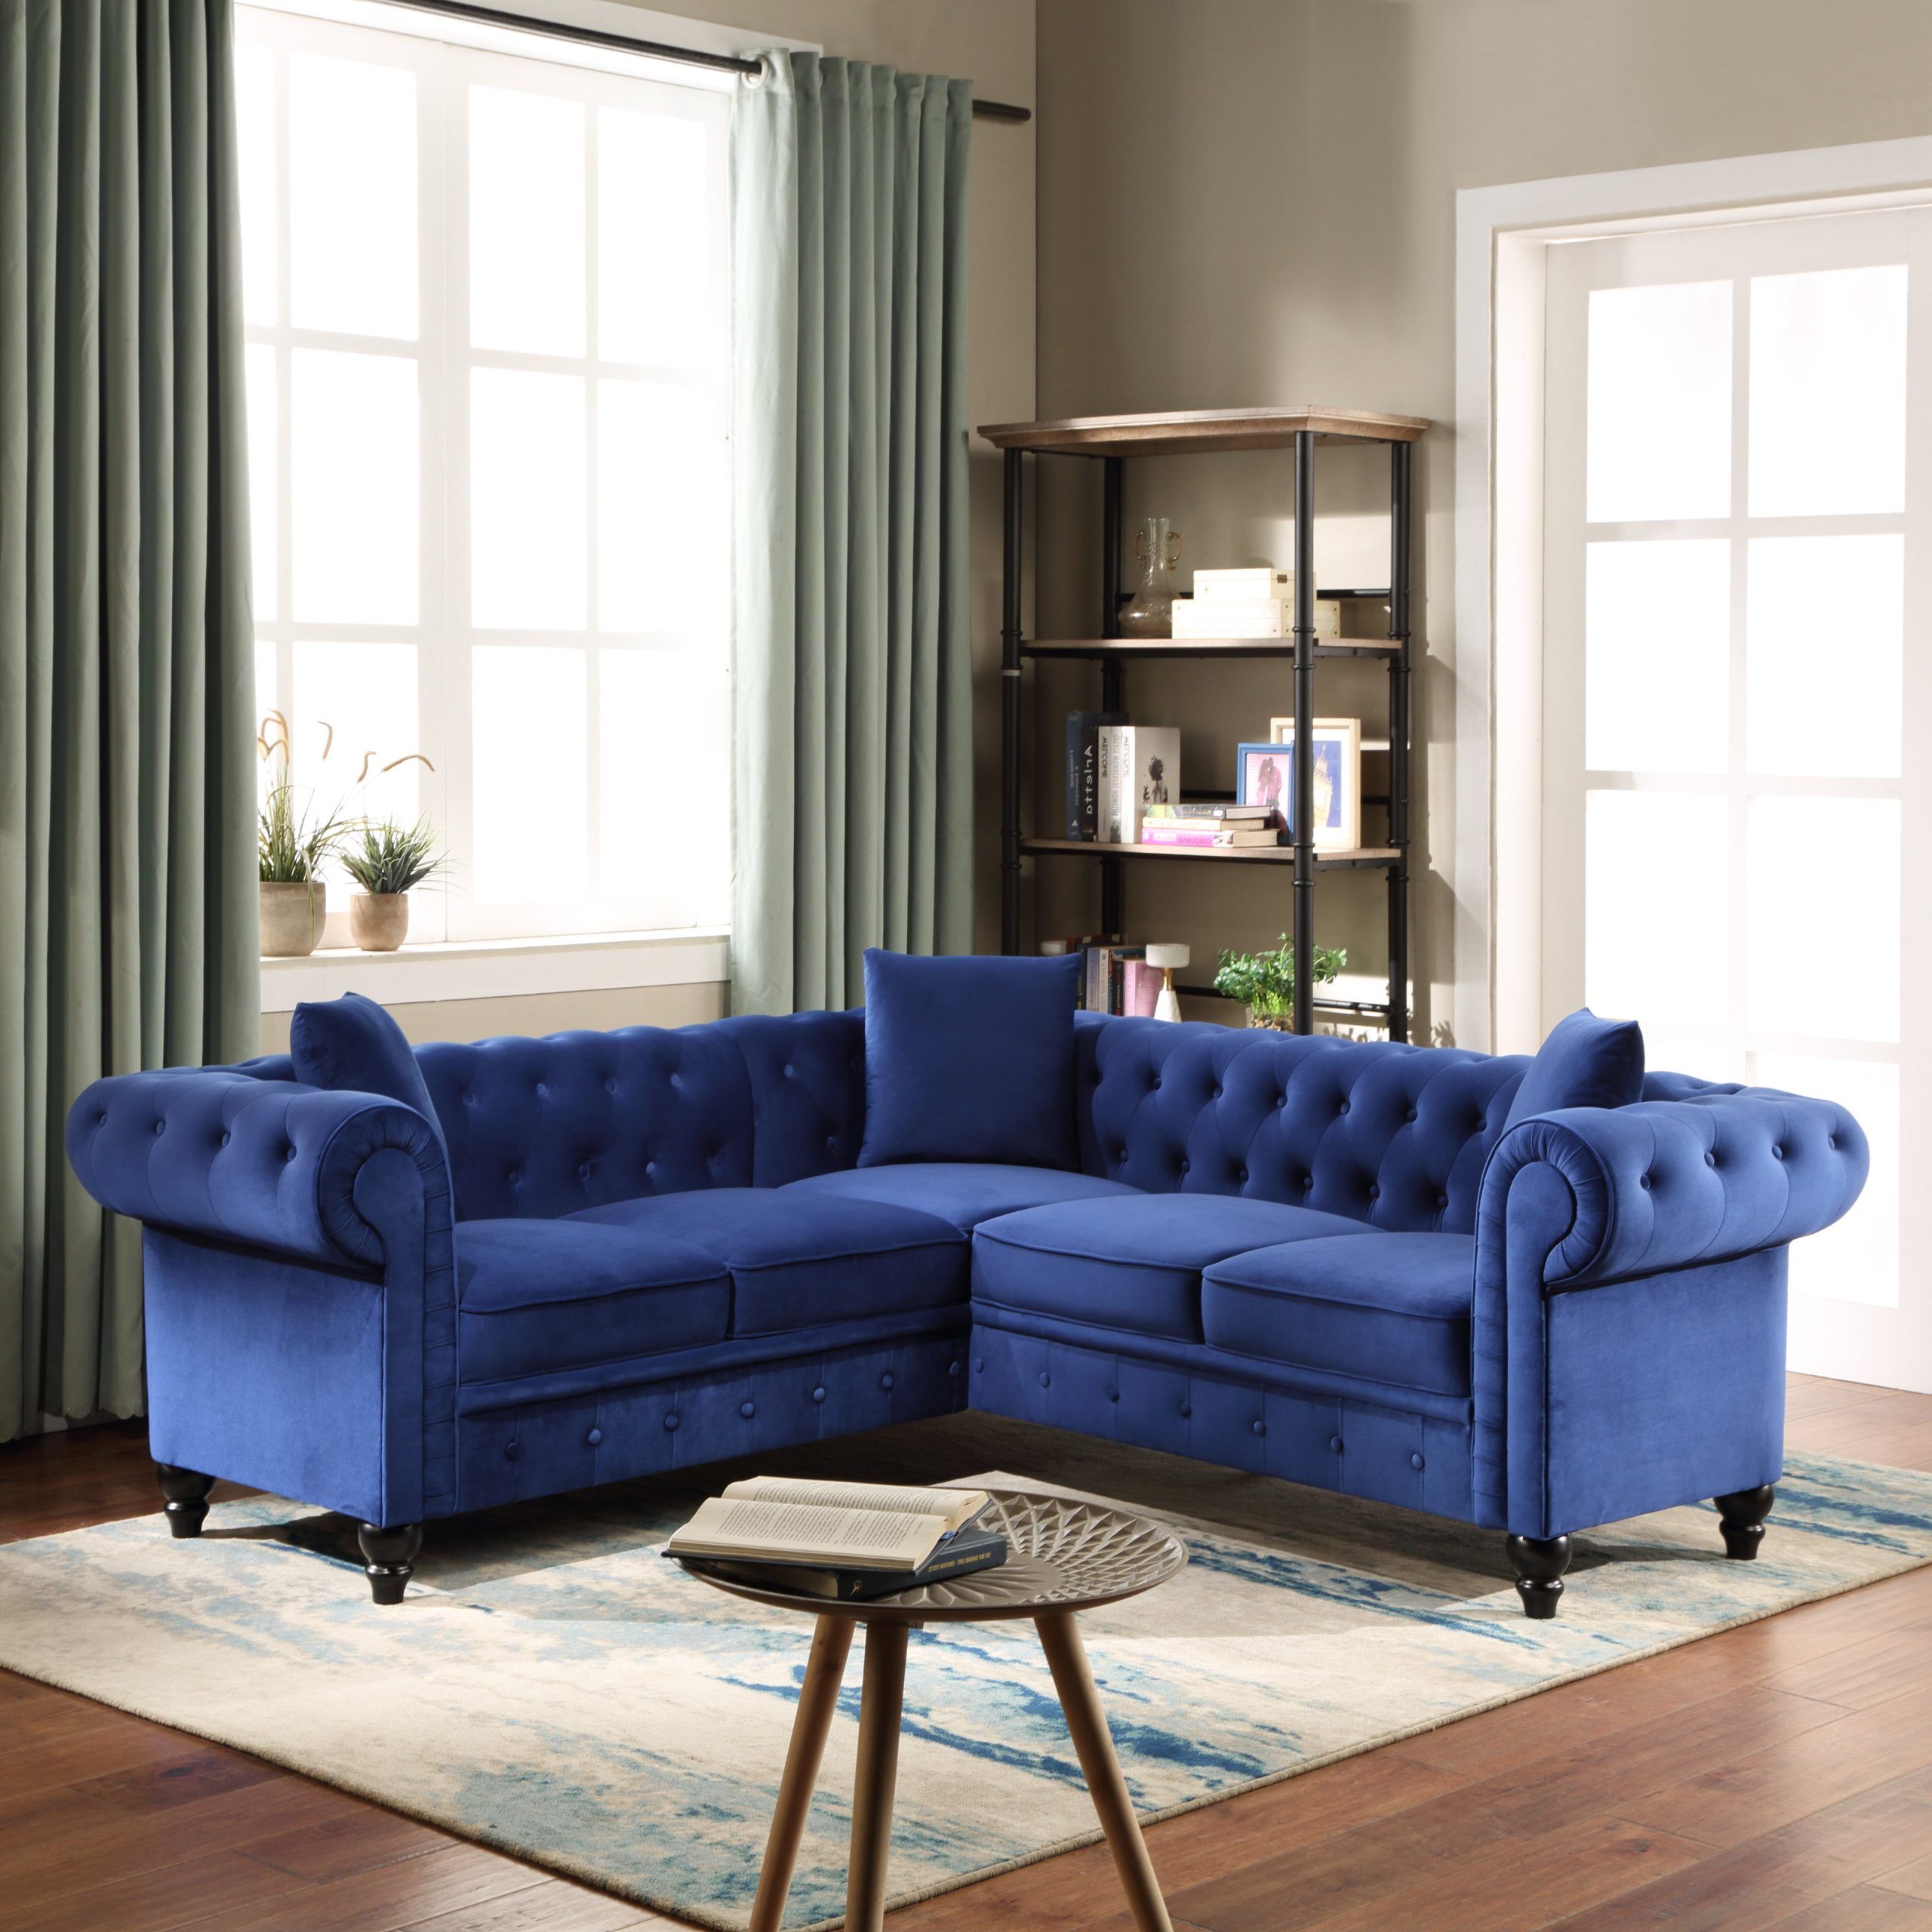 80'' Modern Chesterfield Sofas With 3 Pillows, Upholstered Velvet Pertaining To Chesterfield Sofas (View 8 of 20)